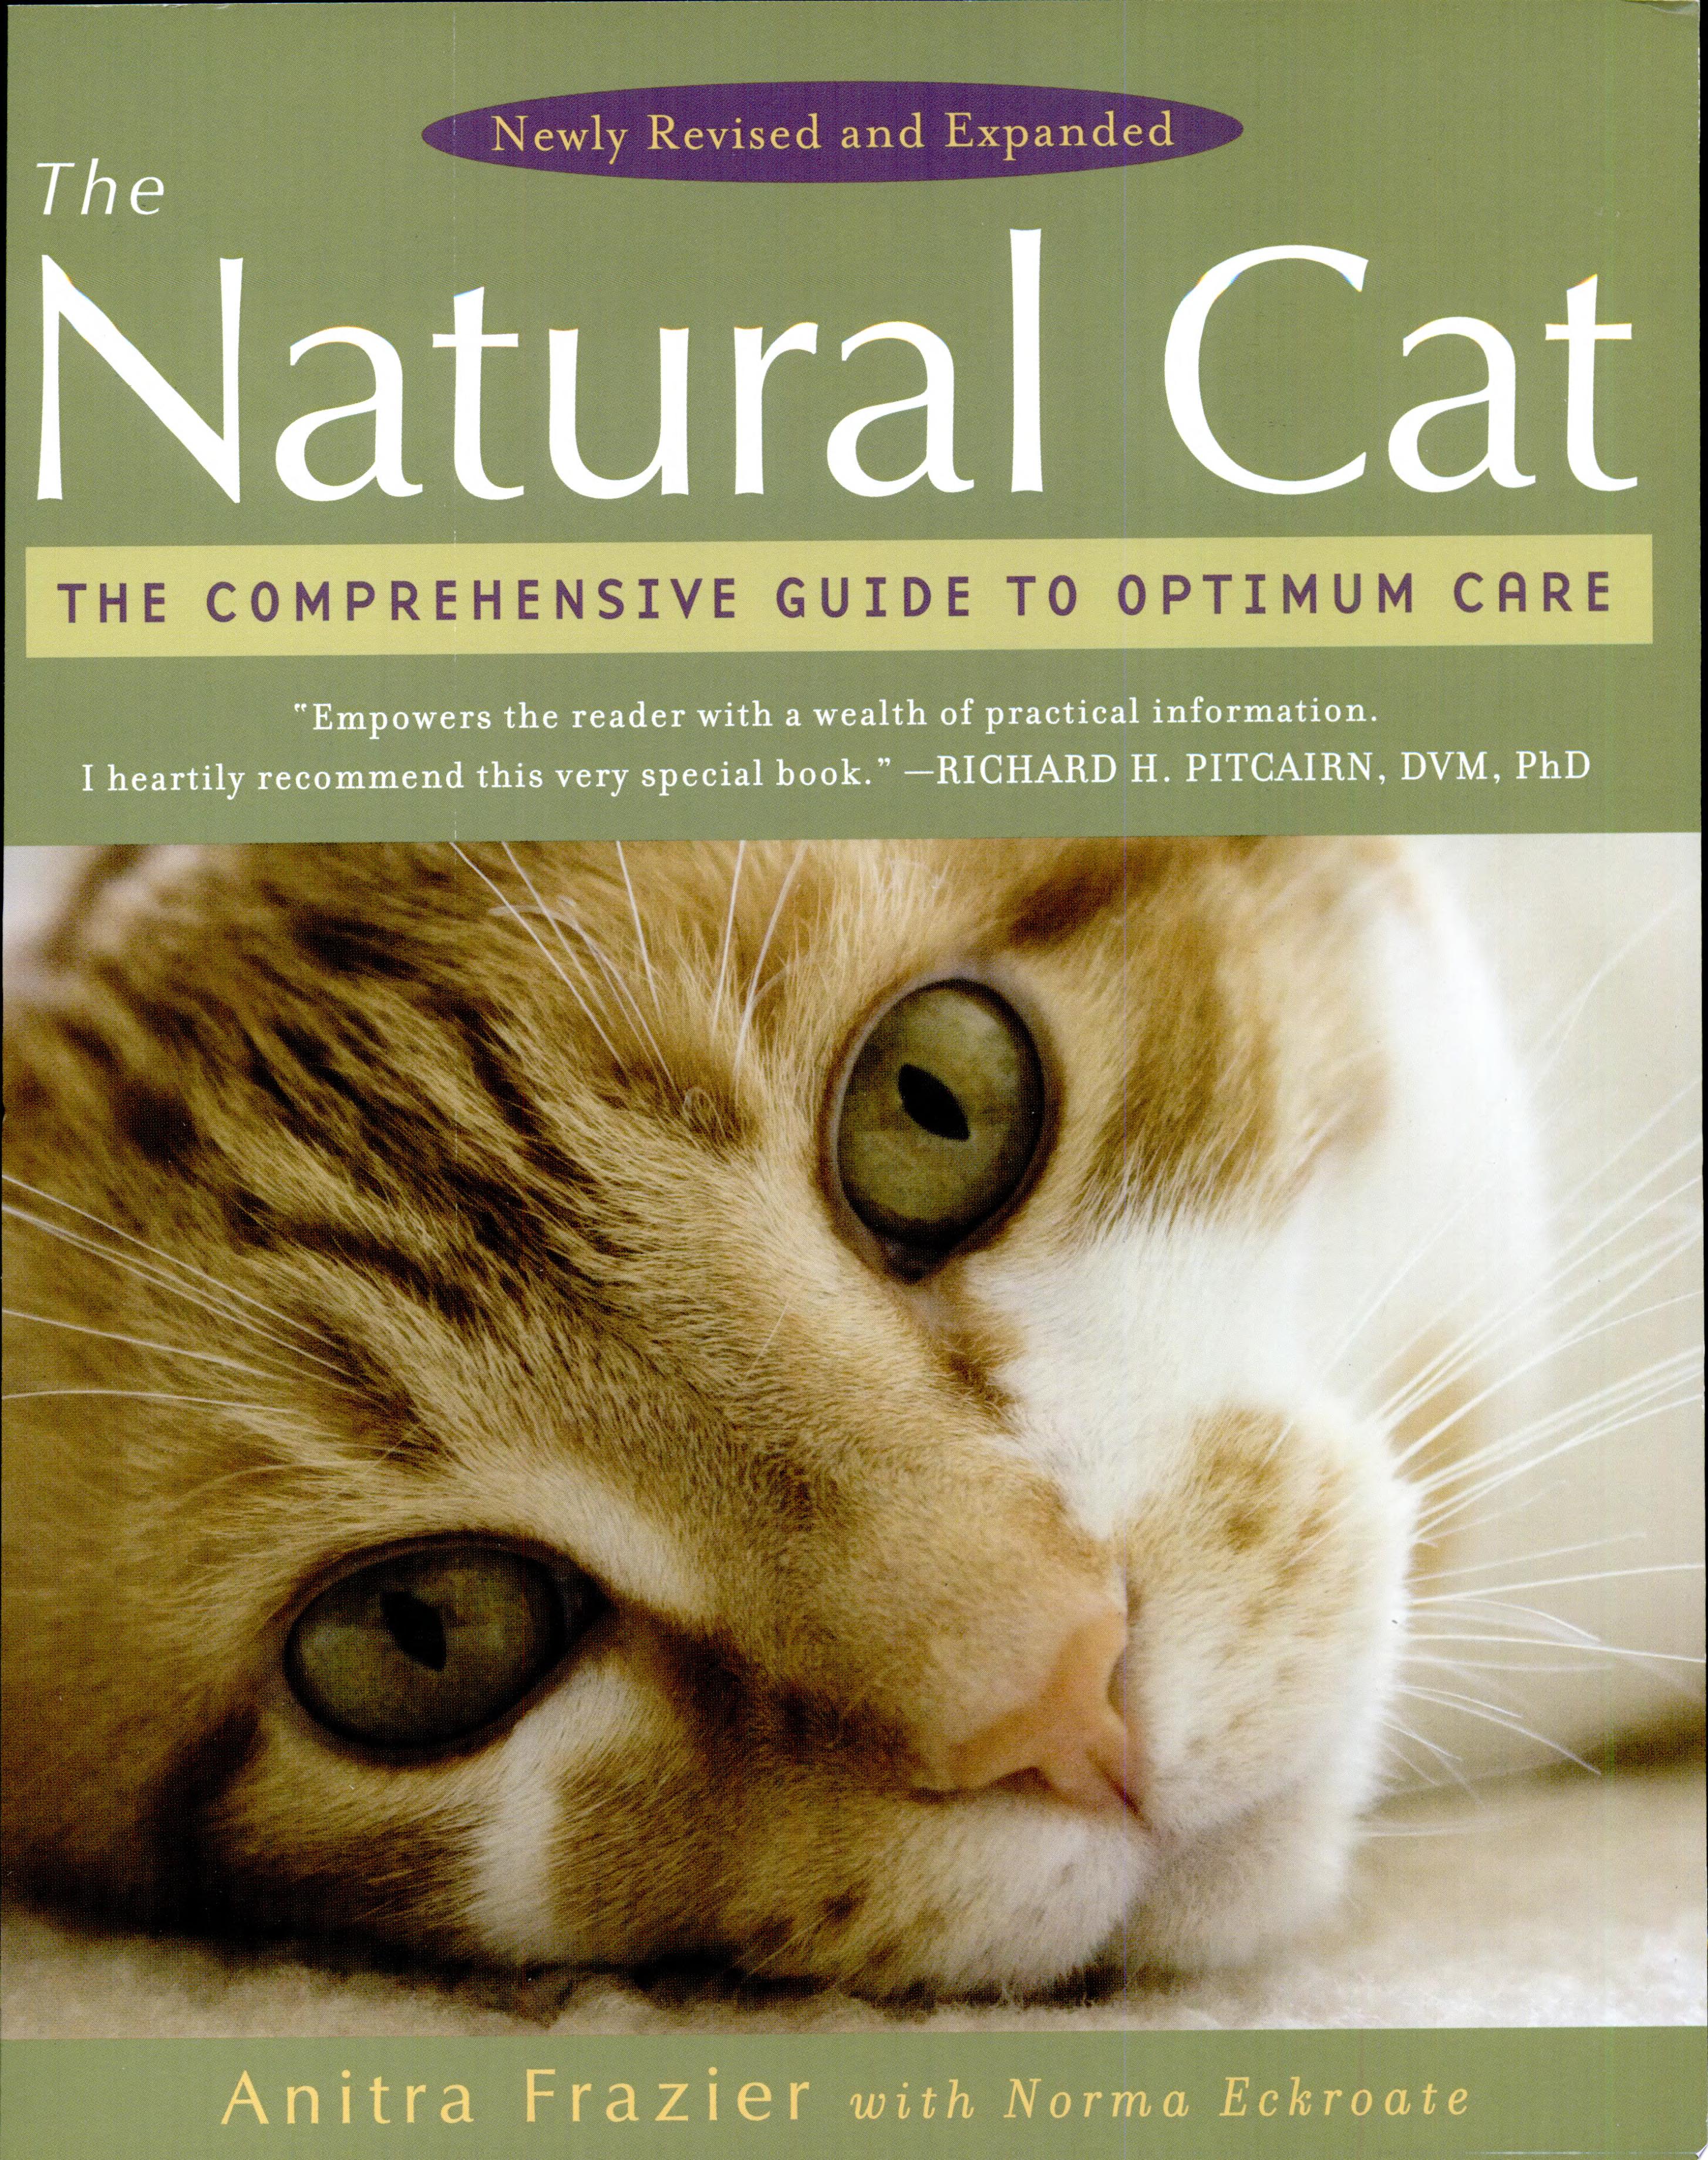 Image for "The Natural Cat"